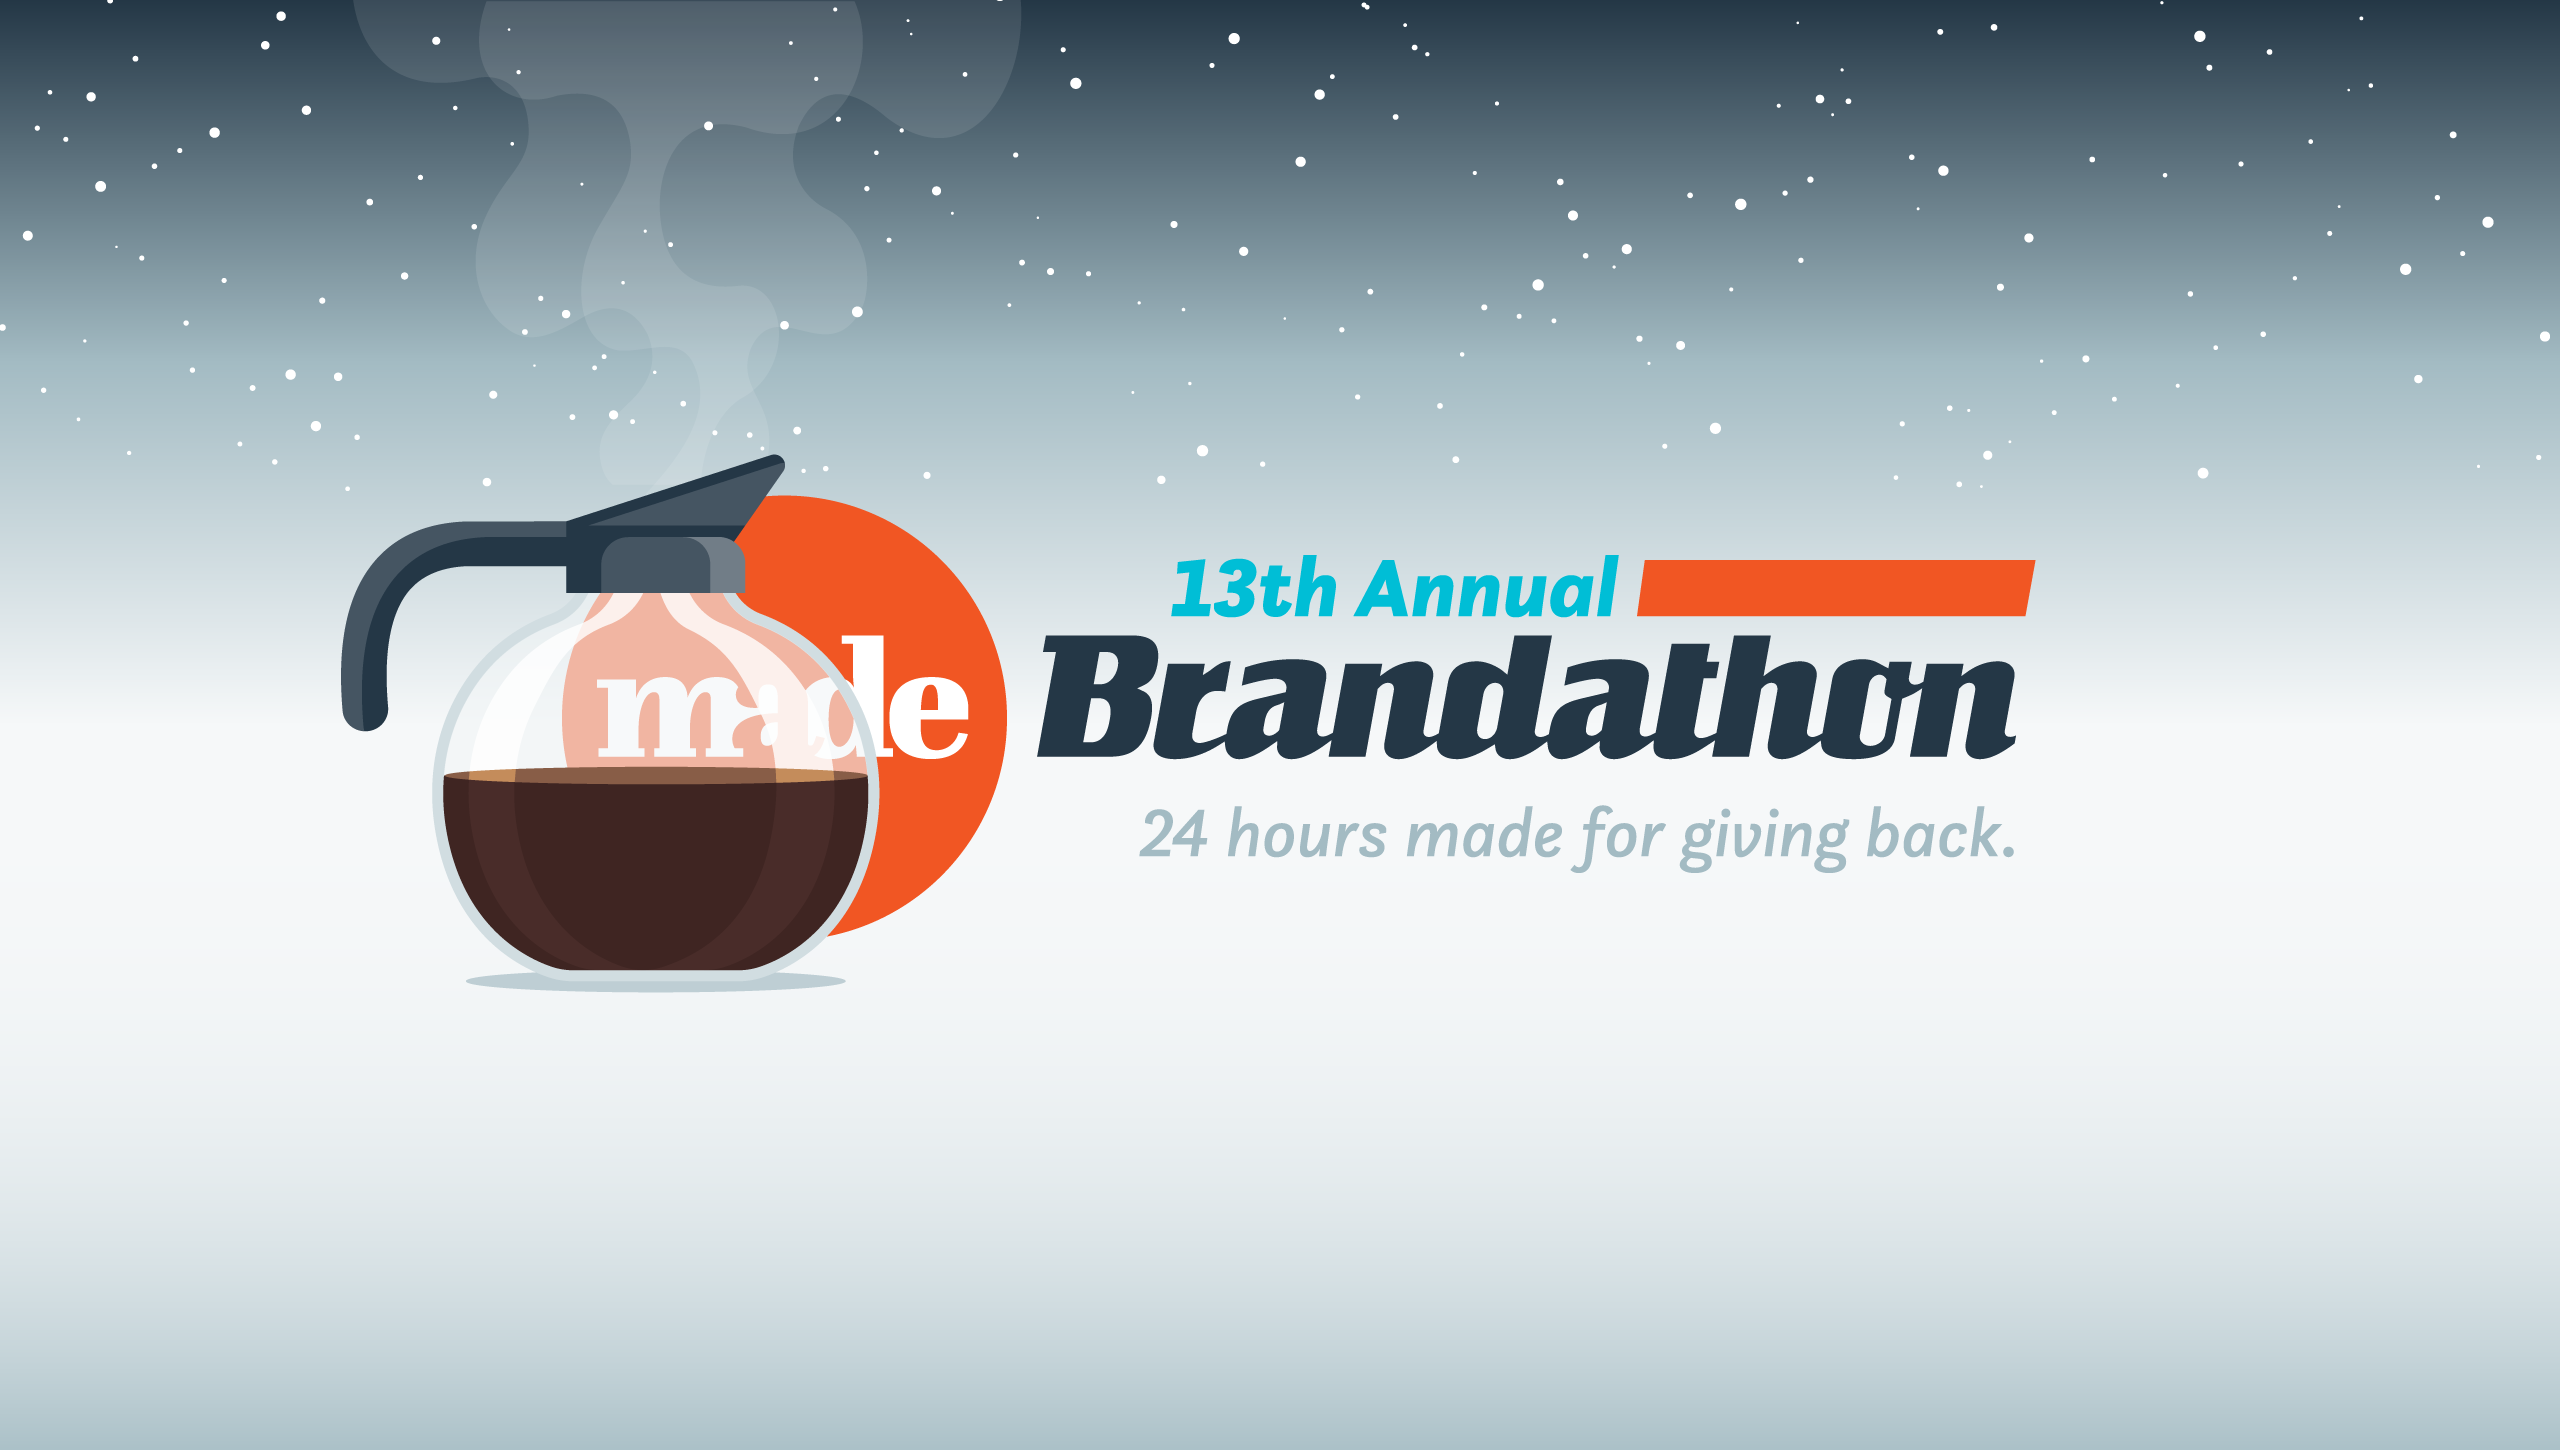 Lessons from Brandathon: Tips for Non-Profit Marketing Success